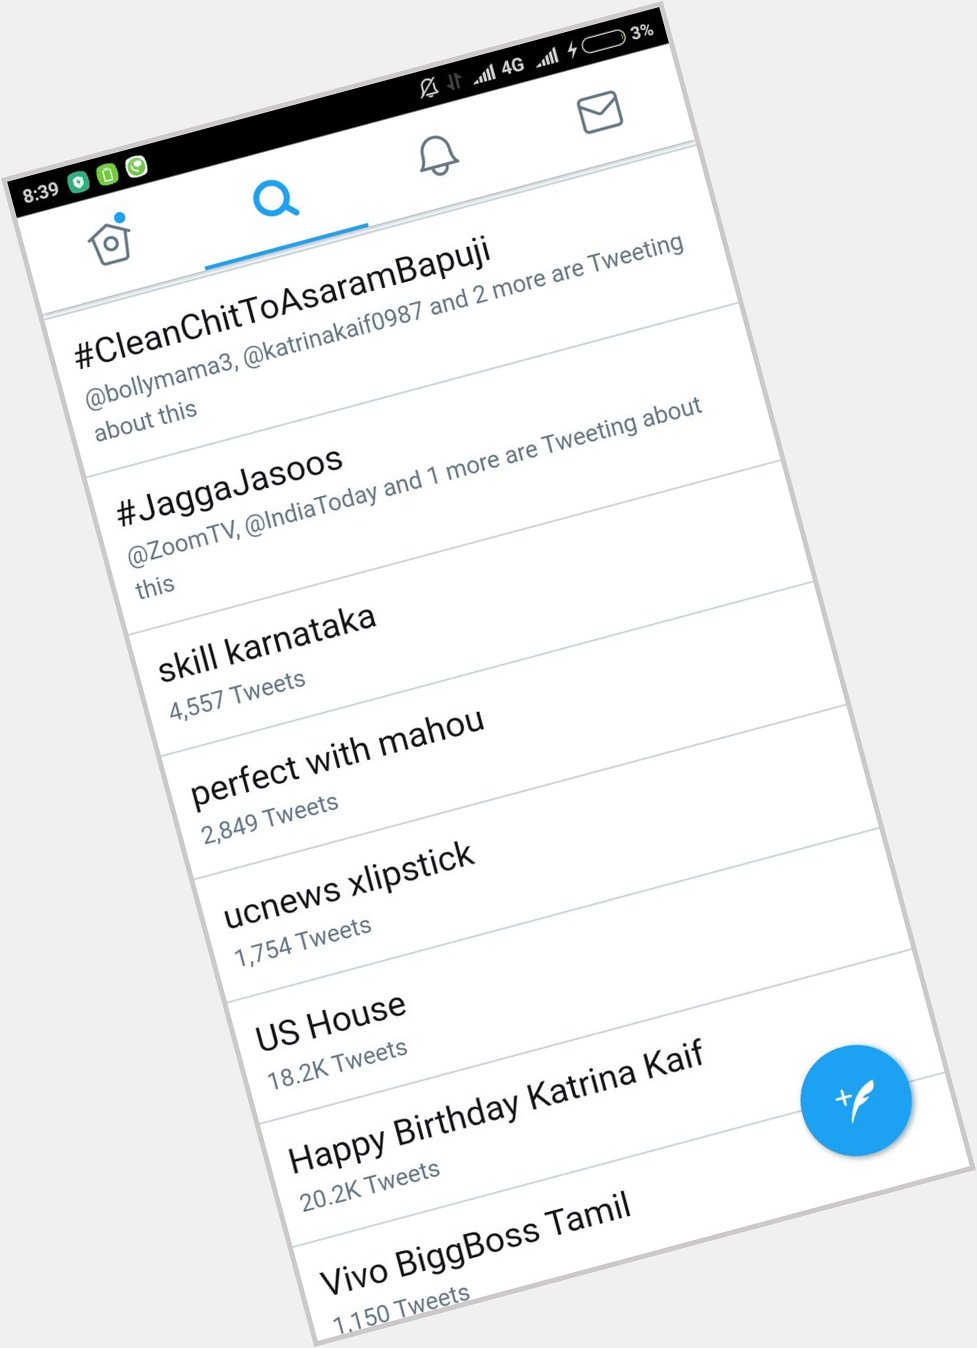  and Happy Birthday Katrina Kaif are trending at 5th and 10th positions respectively 